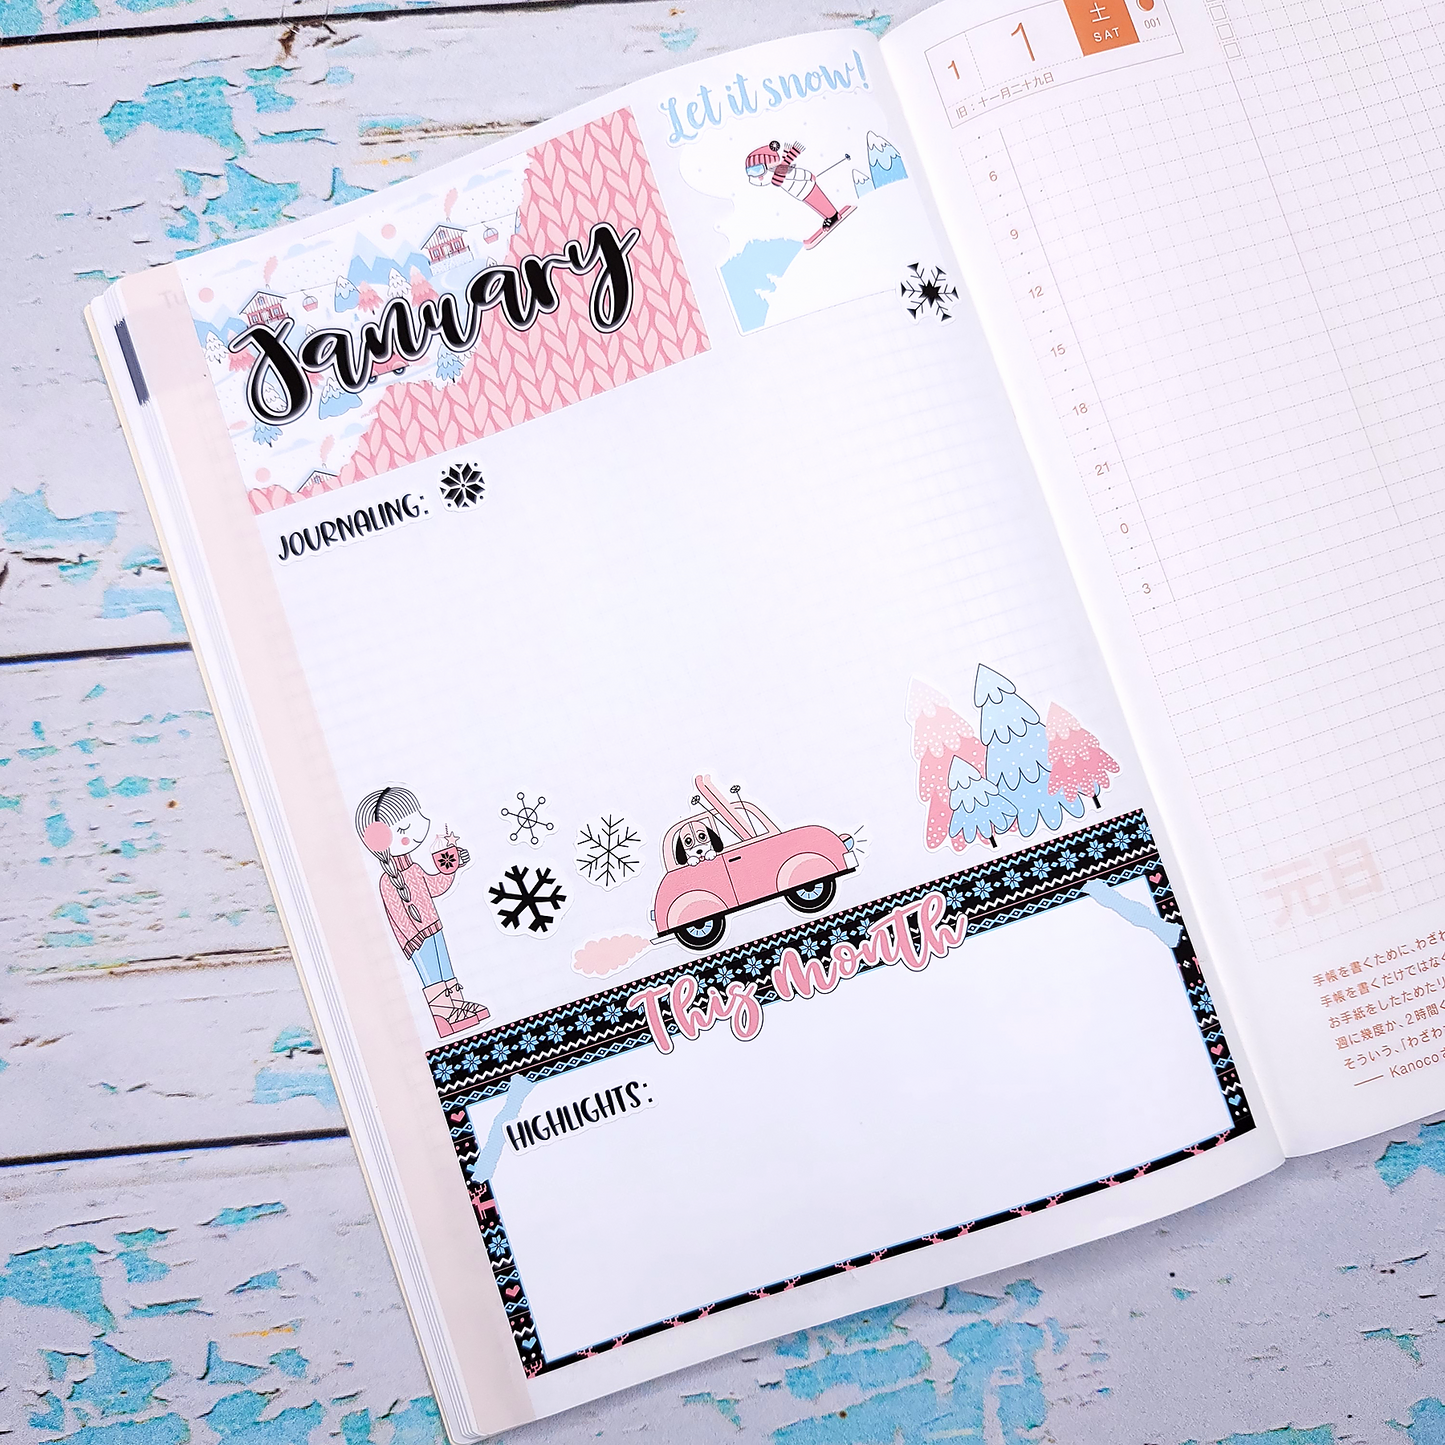 Hobonichi Cousin Monthly Pick Your Month Be A Wildflower Themed Planner Sticker Kit for Hobo Cousin or Similar Planners